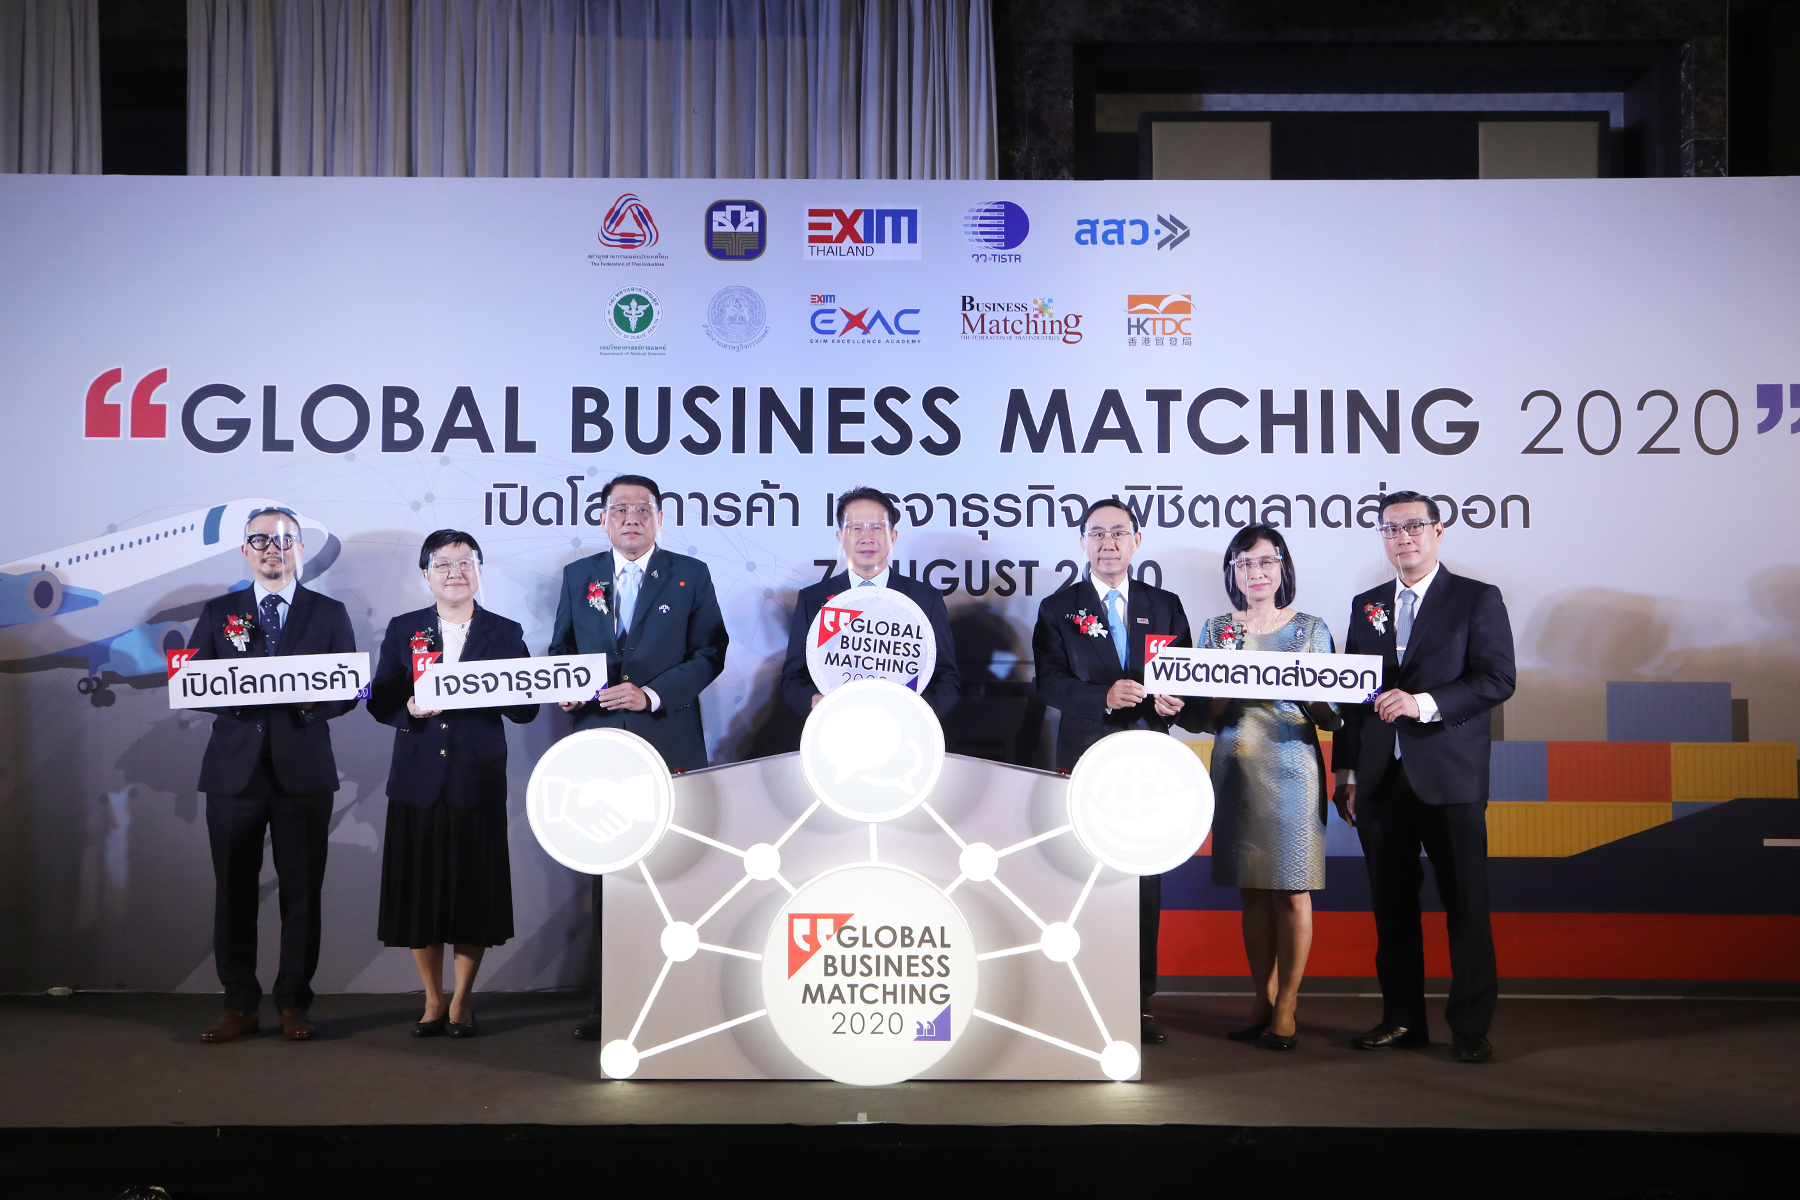 EXIM Thailand Joins Hands with Public and Private Alliances  in Online Business Matching between Thai SME Exporters and Importers  in CLMV and Other ASEAN Countries